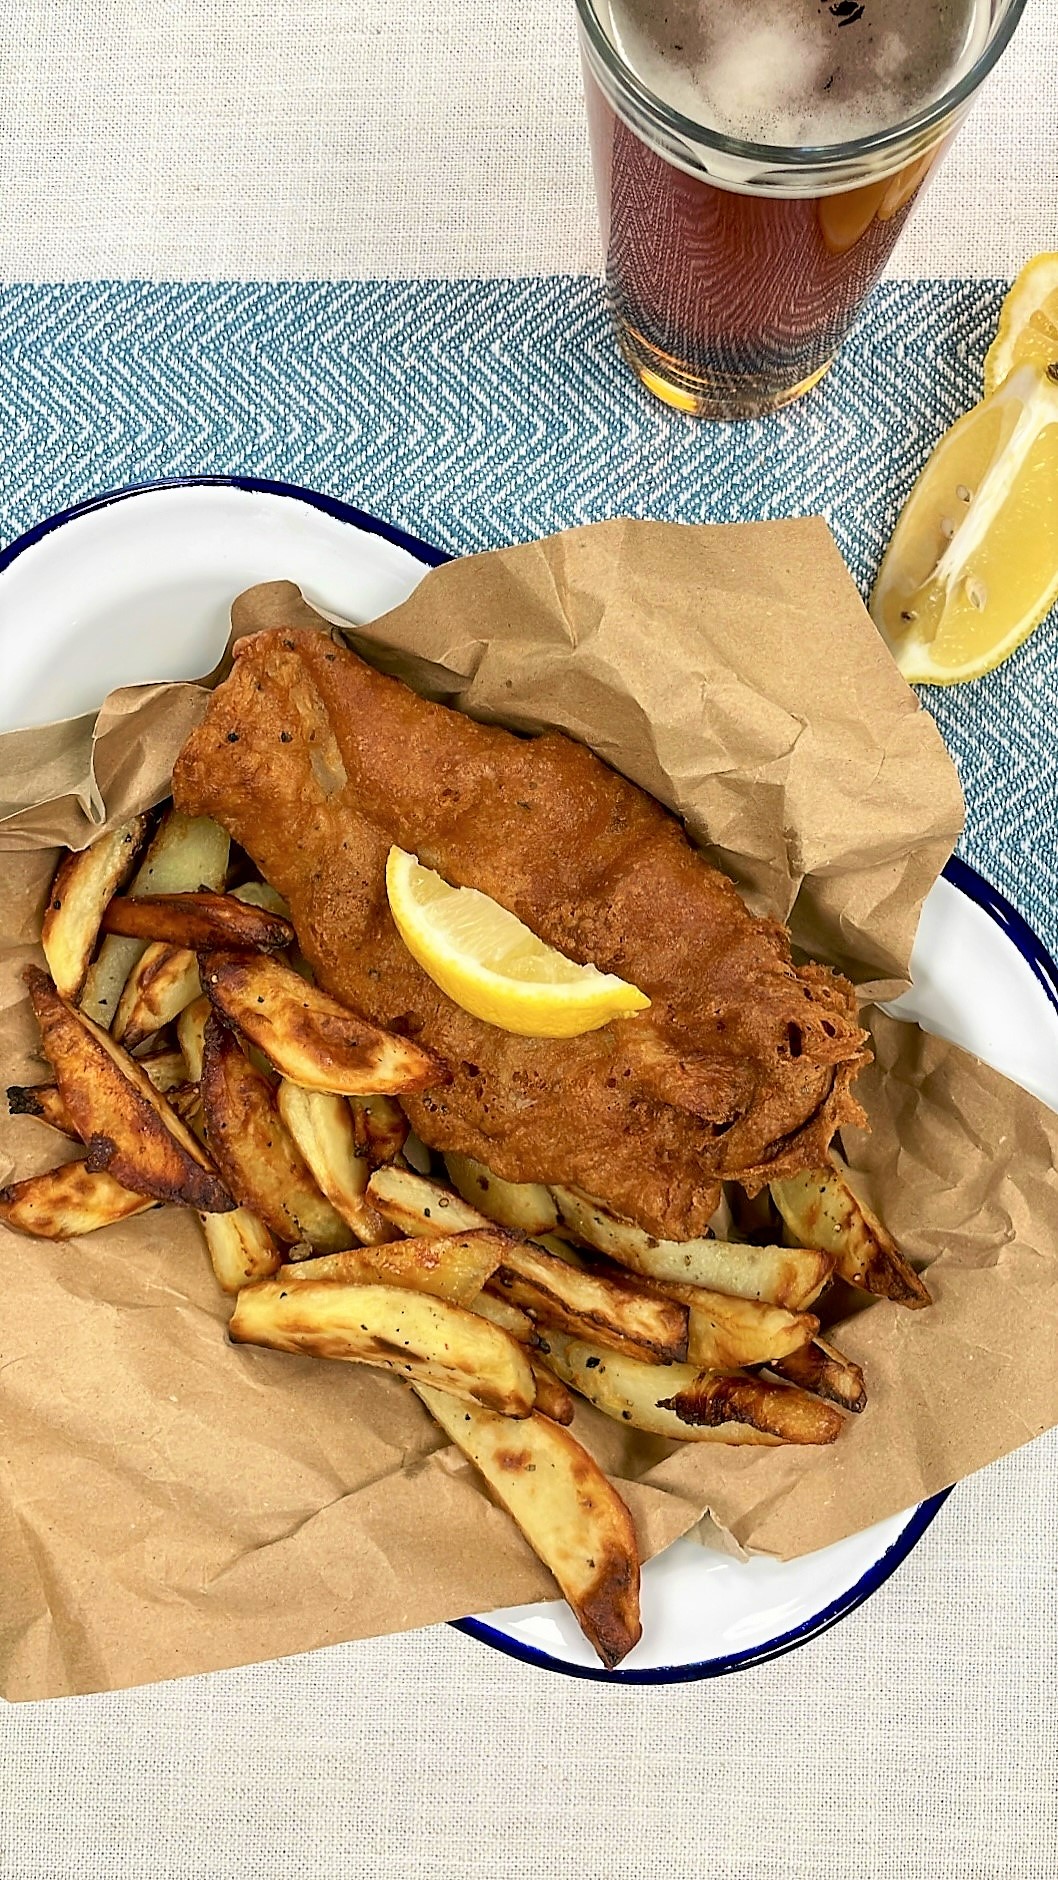 Beer Battered Fish with Homemade Chips